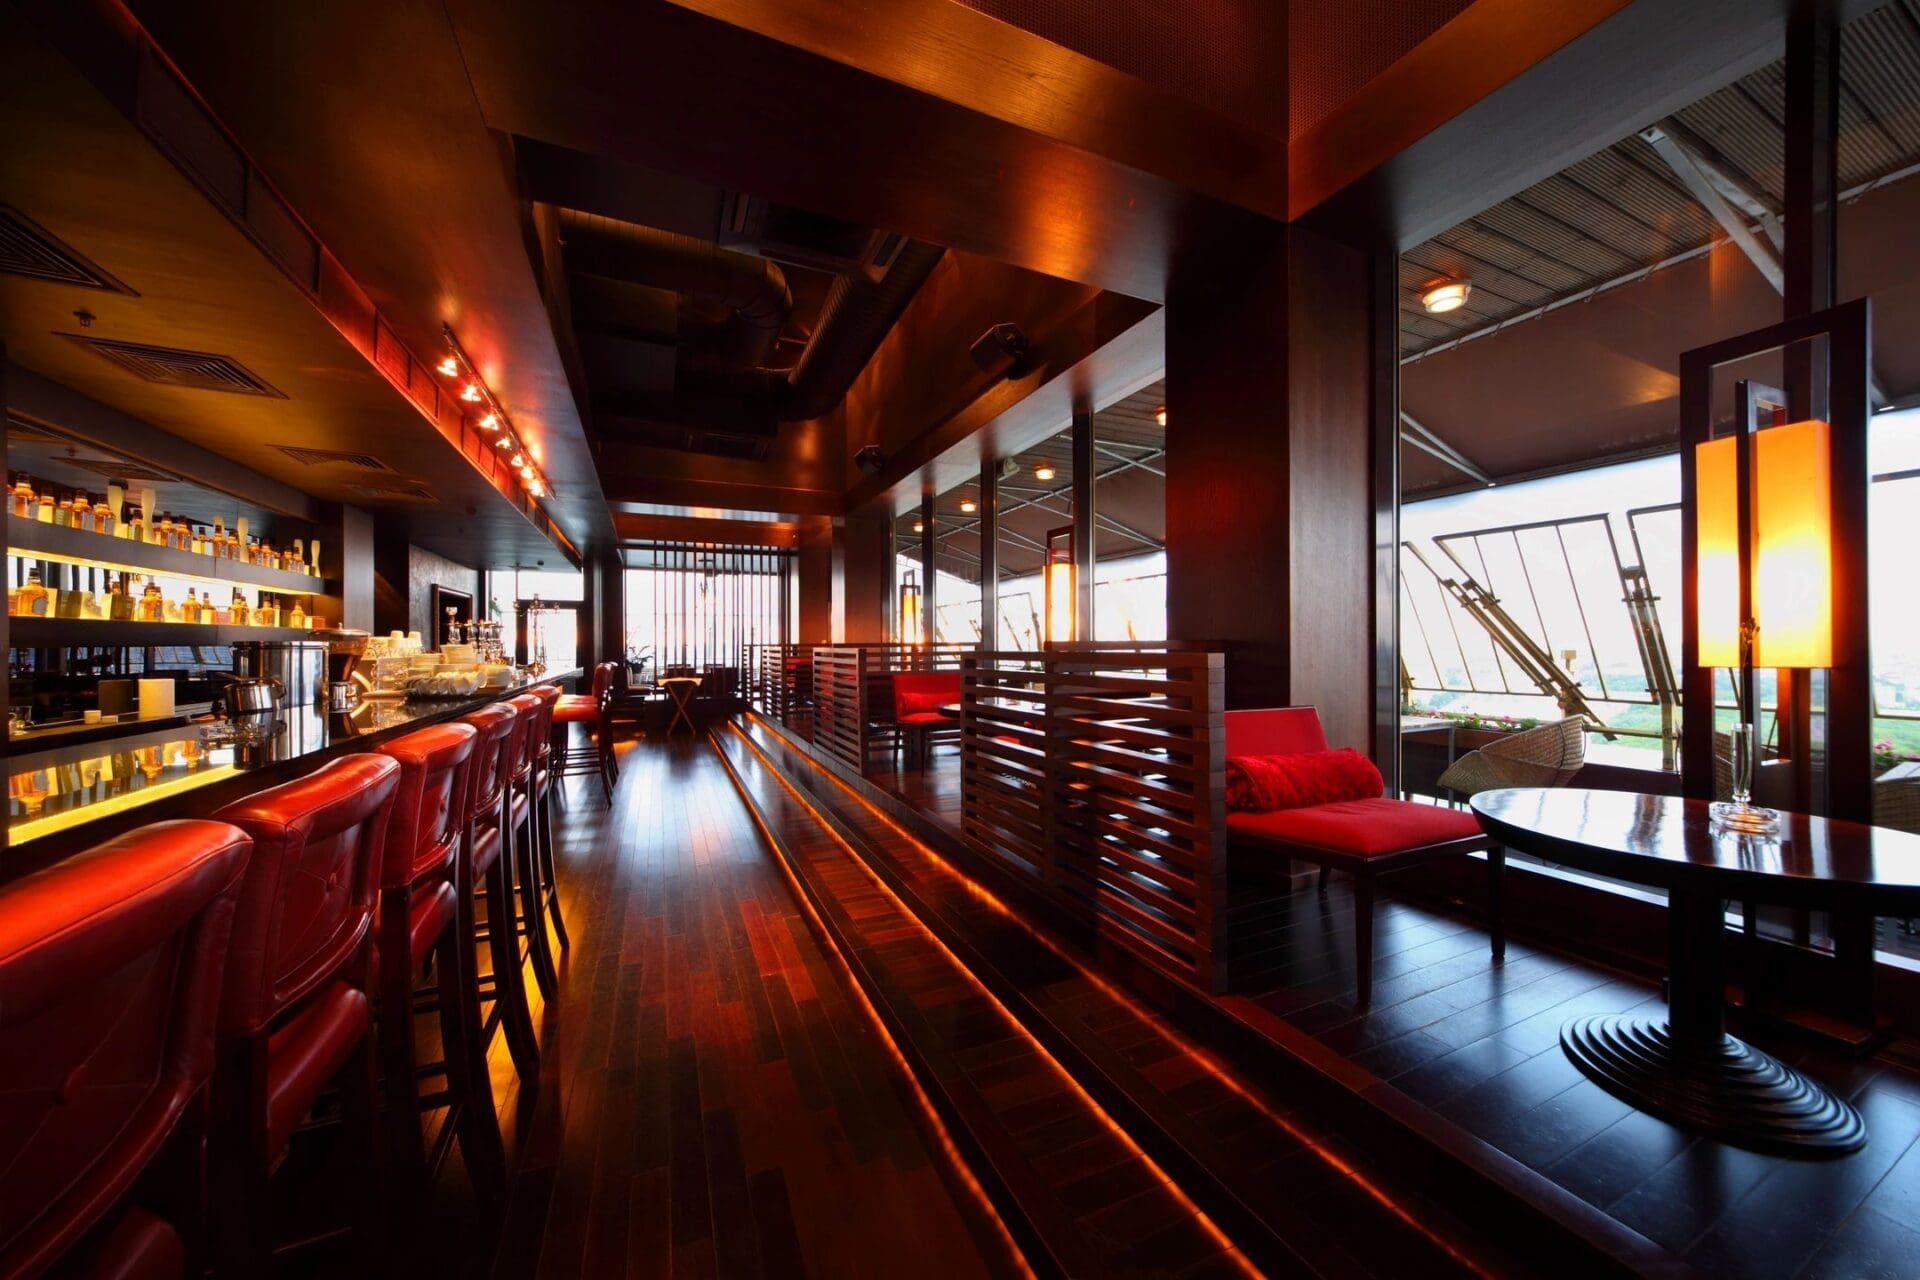 A bar with a wooden floor and red chairs.